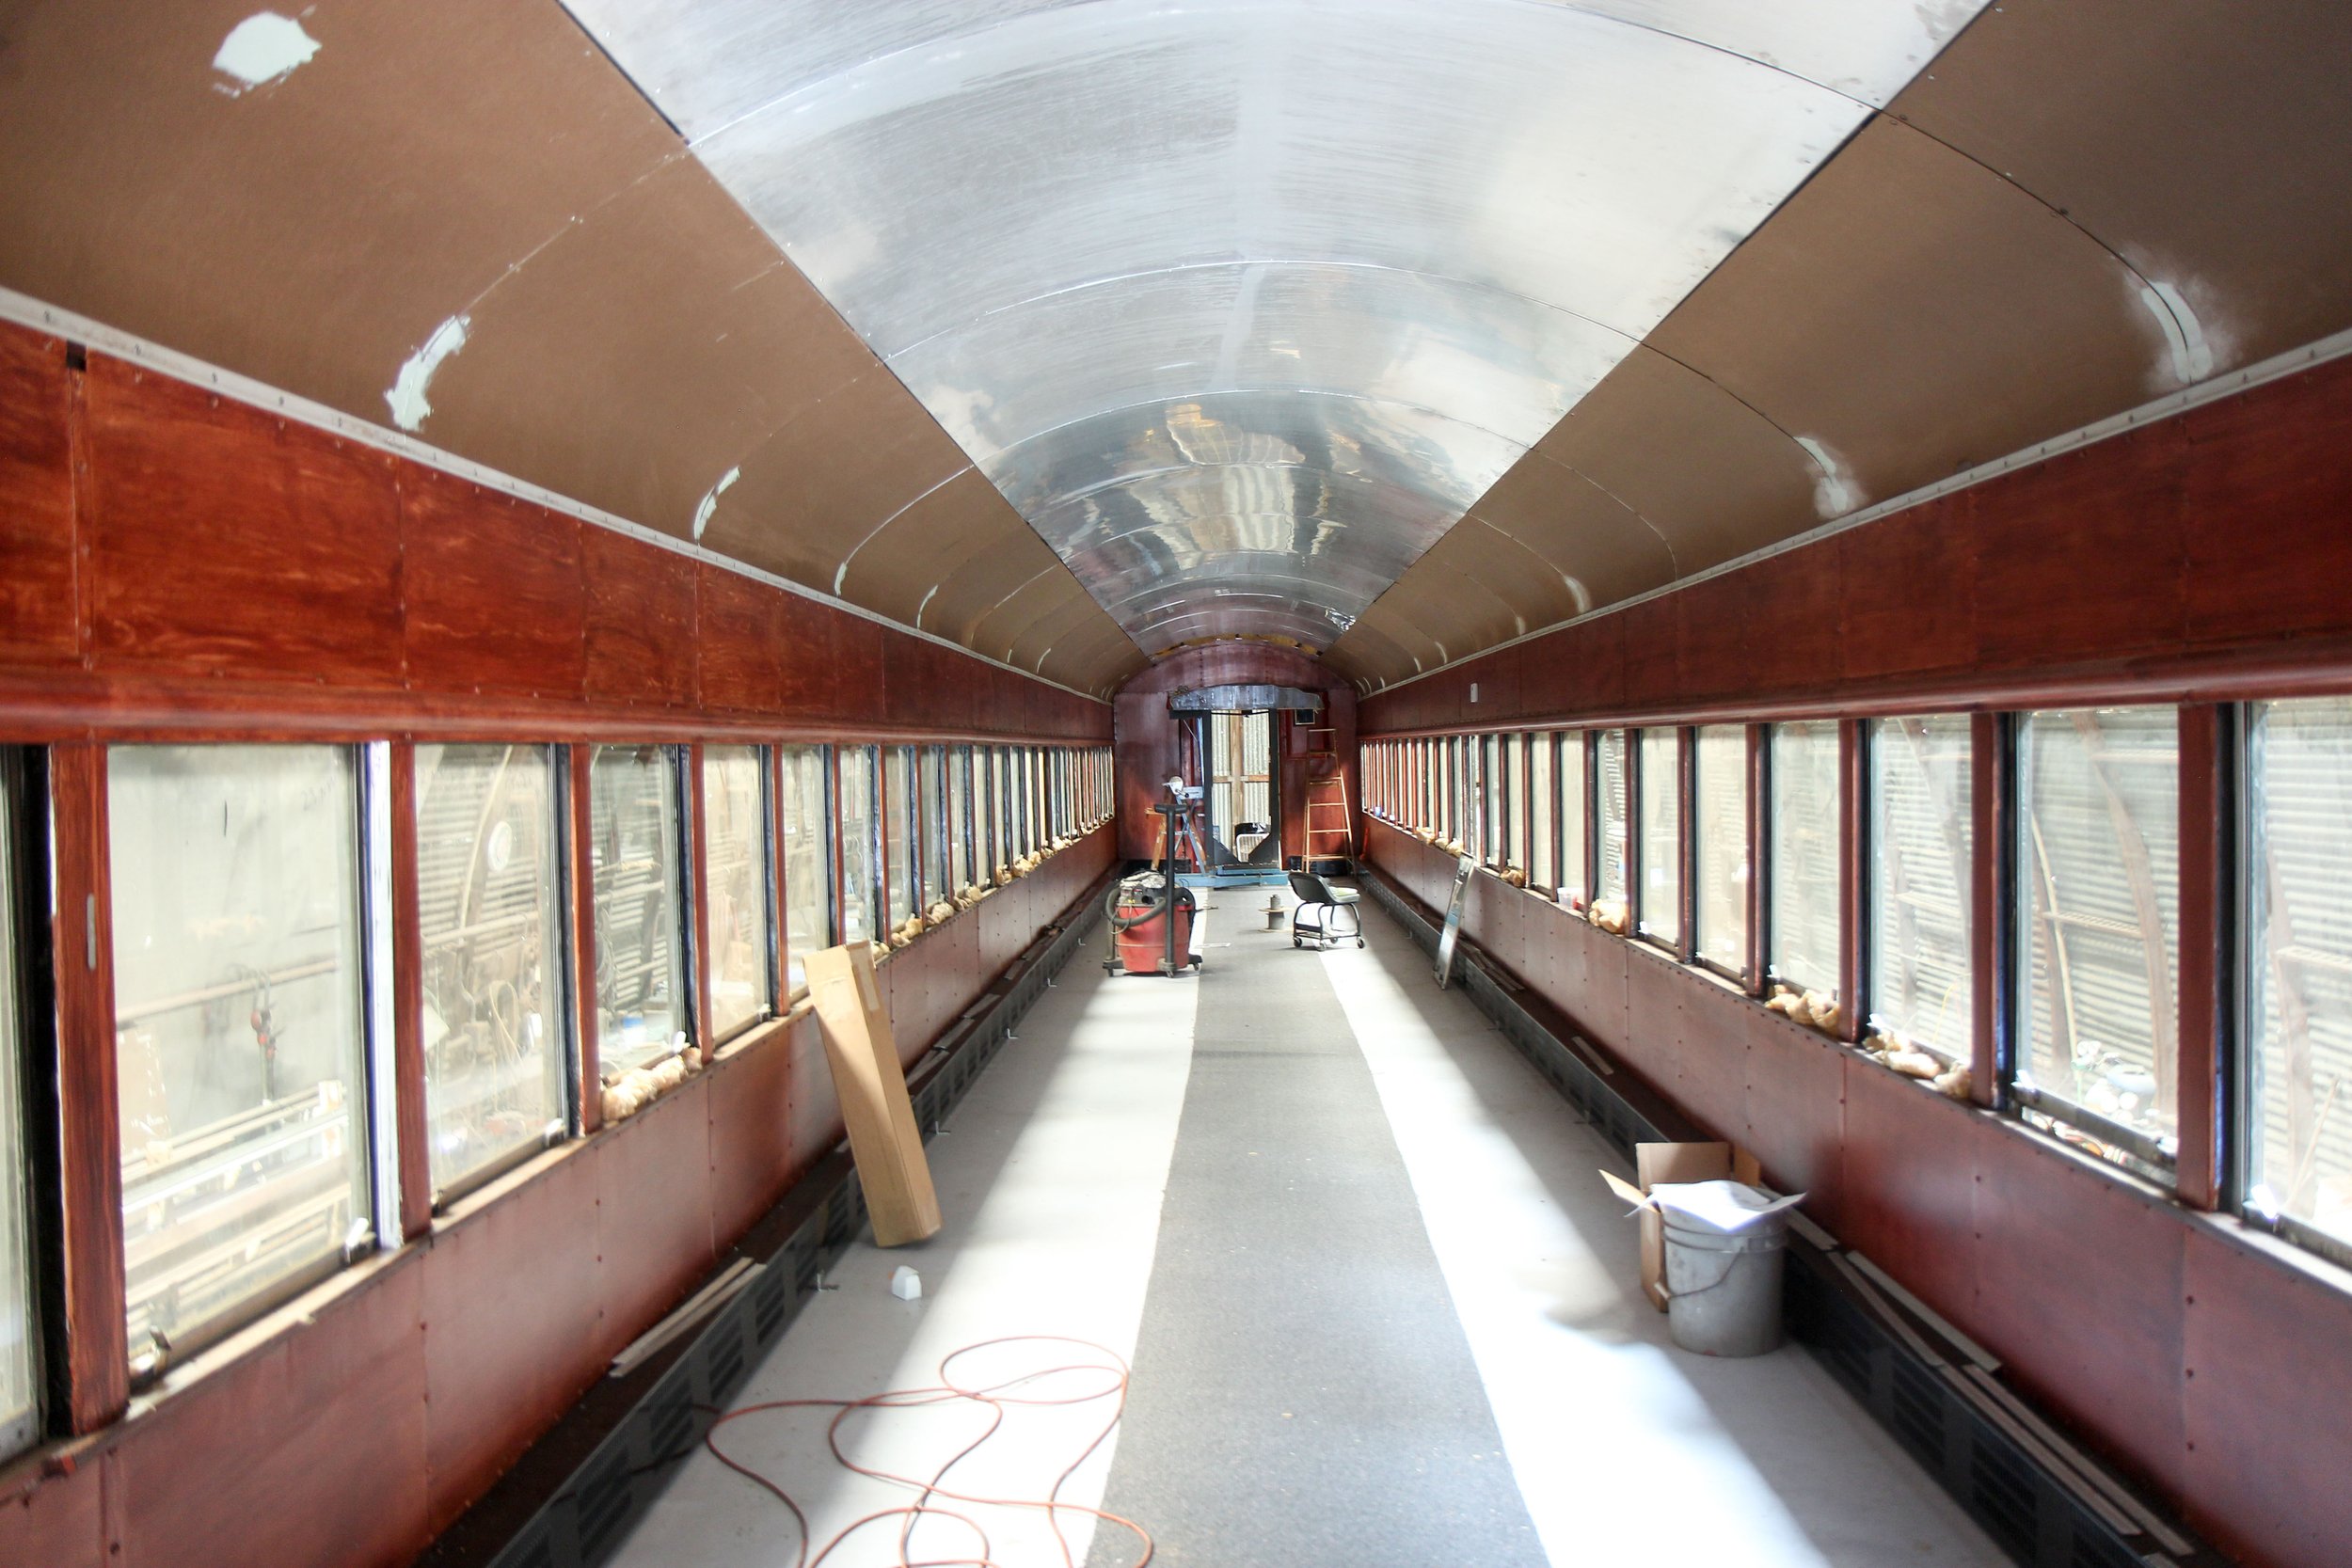  Back inside the car, all the new panels have been installed and repainted and the car awaits installation of the seats and grab bars.  